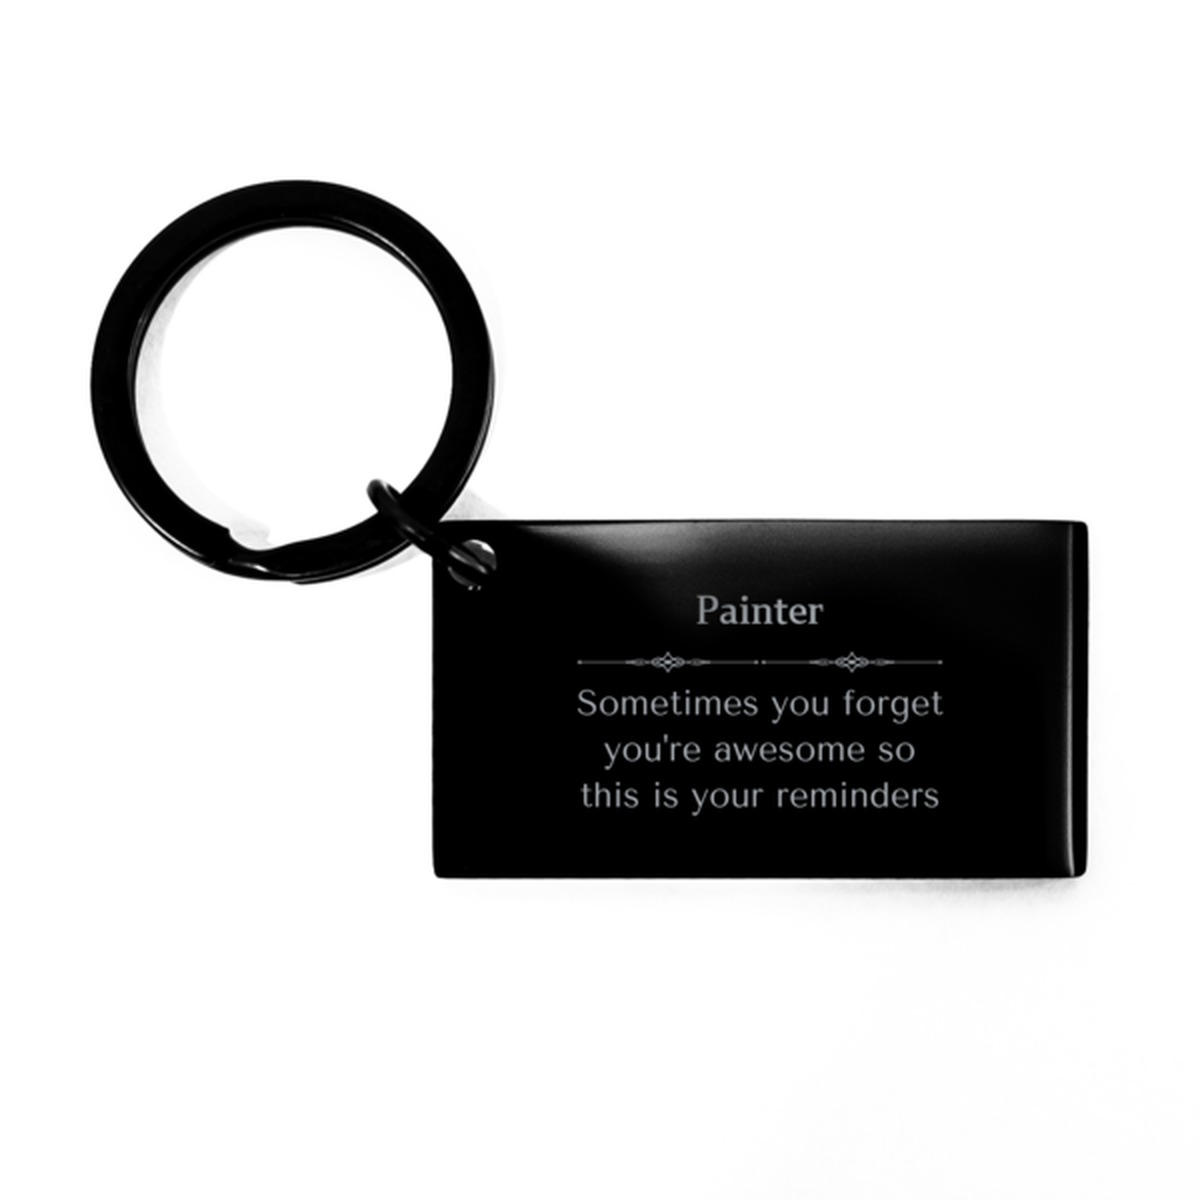 Sentimental Painter Keychain, Priest Sometimes you forget you're awesome so this is your reminders, Graduation Christmas Birthday Gifts for Painter, Men, Women, Coworkers